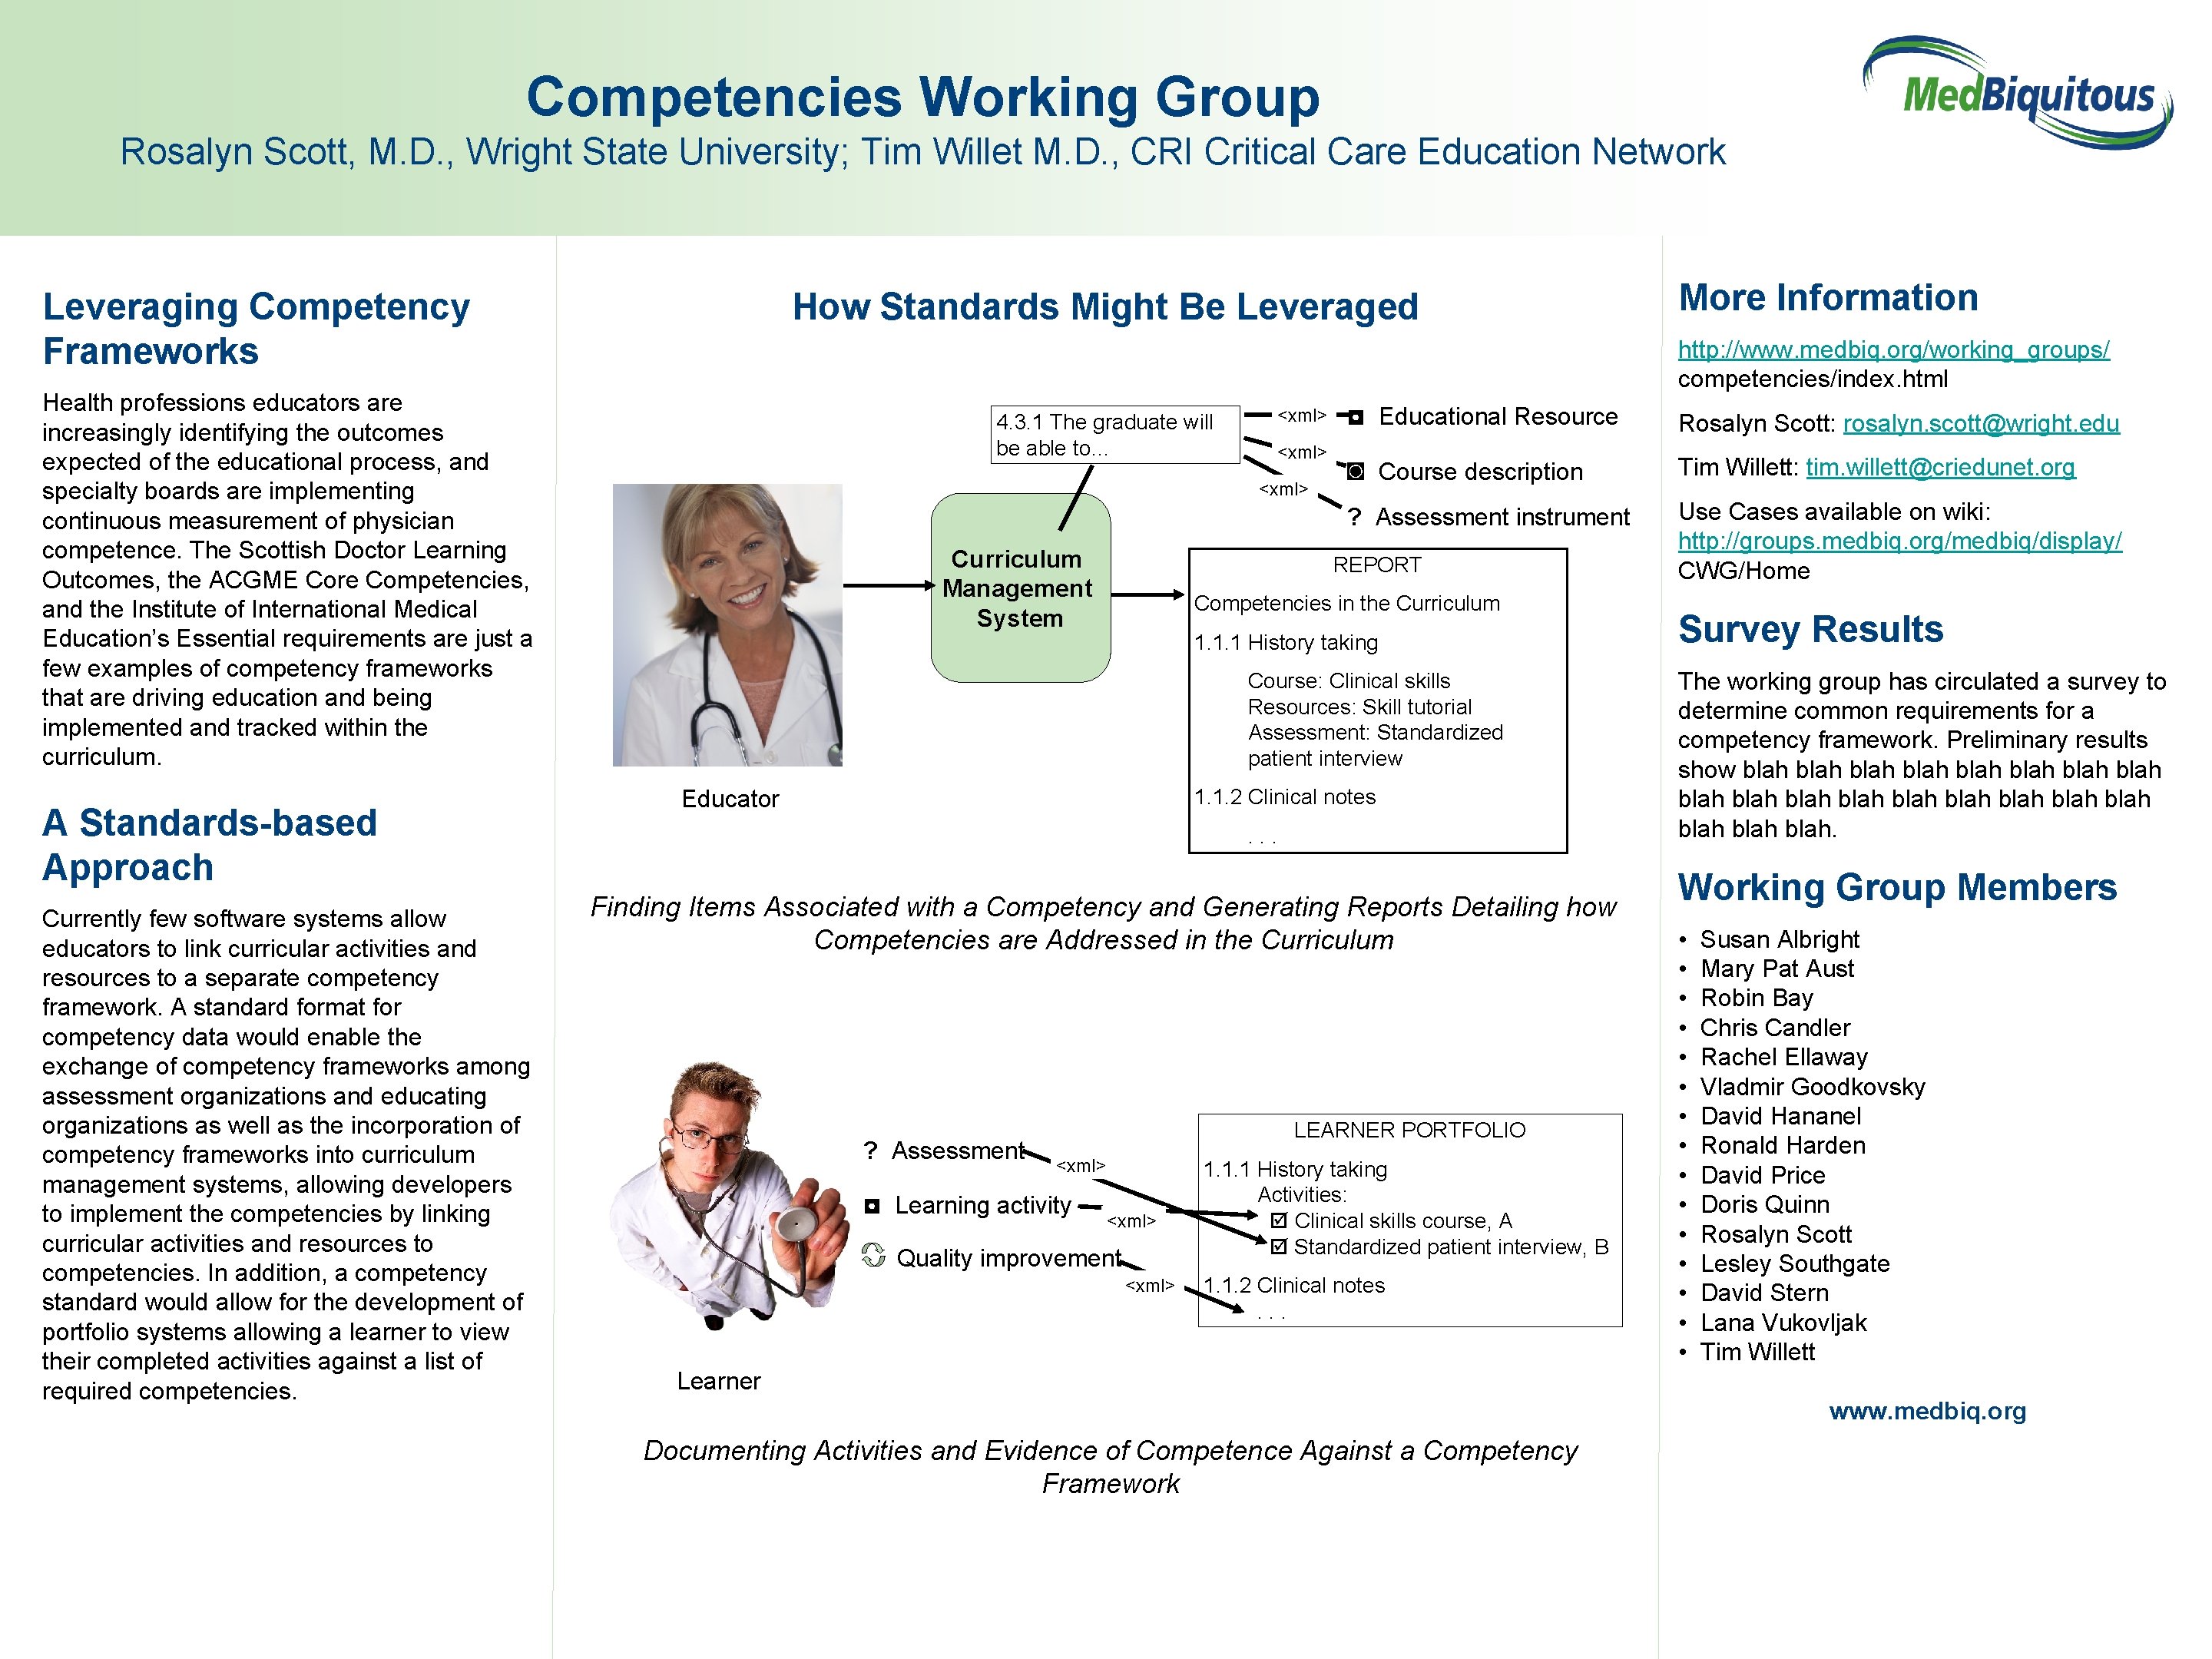 Competencies Working Group Rosalyn Scott, M. D. , Wright State University; Tim Willet M.